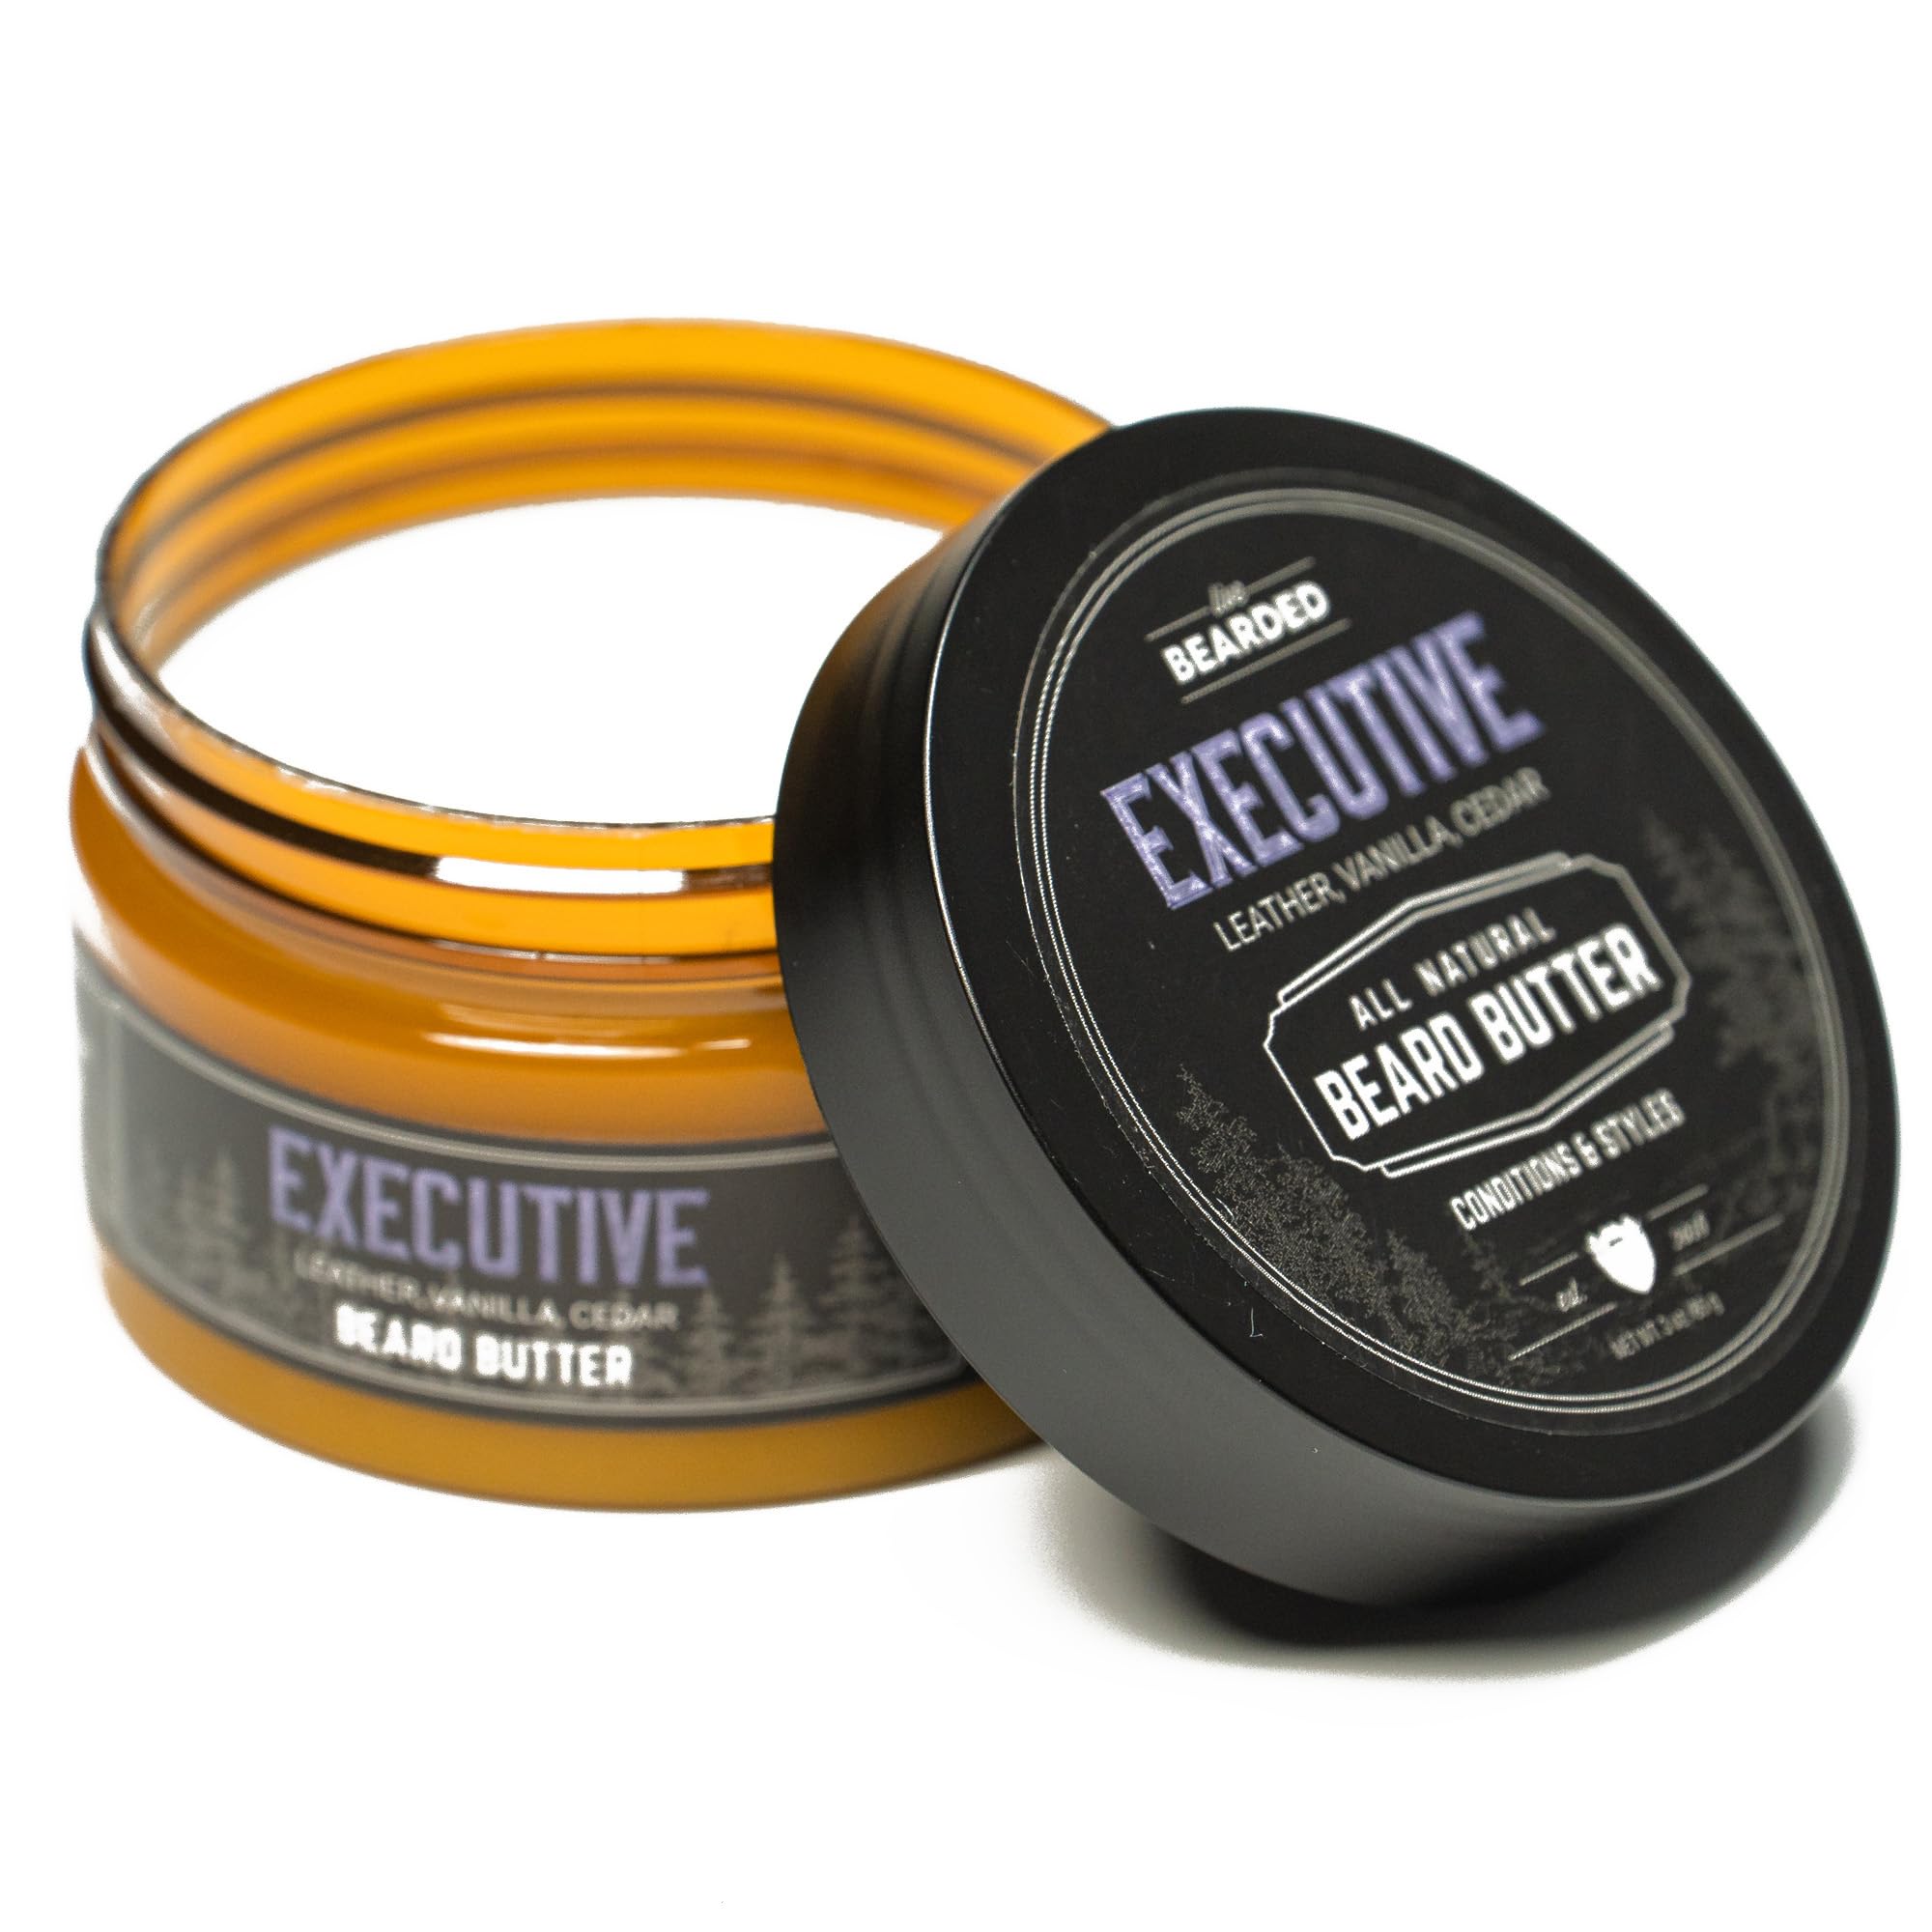 Live Bearded: Beard Butter, Made in USA - Executive, 3oz - Beard Leave in Conditioner Beard Care, All-Natural Beard Softener with Shea Butter